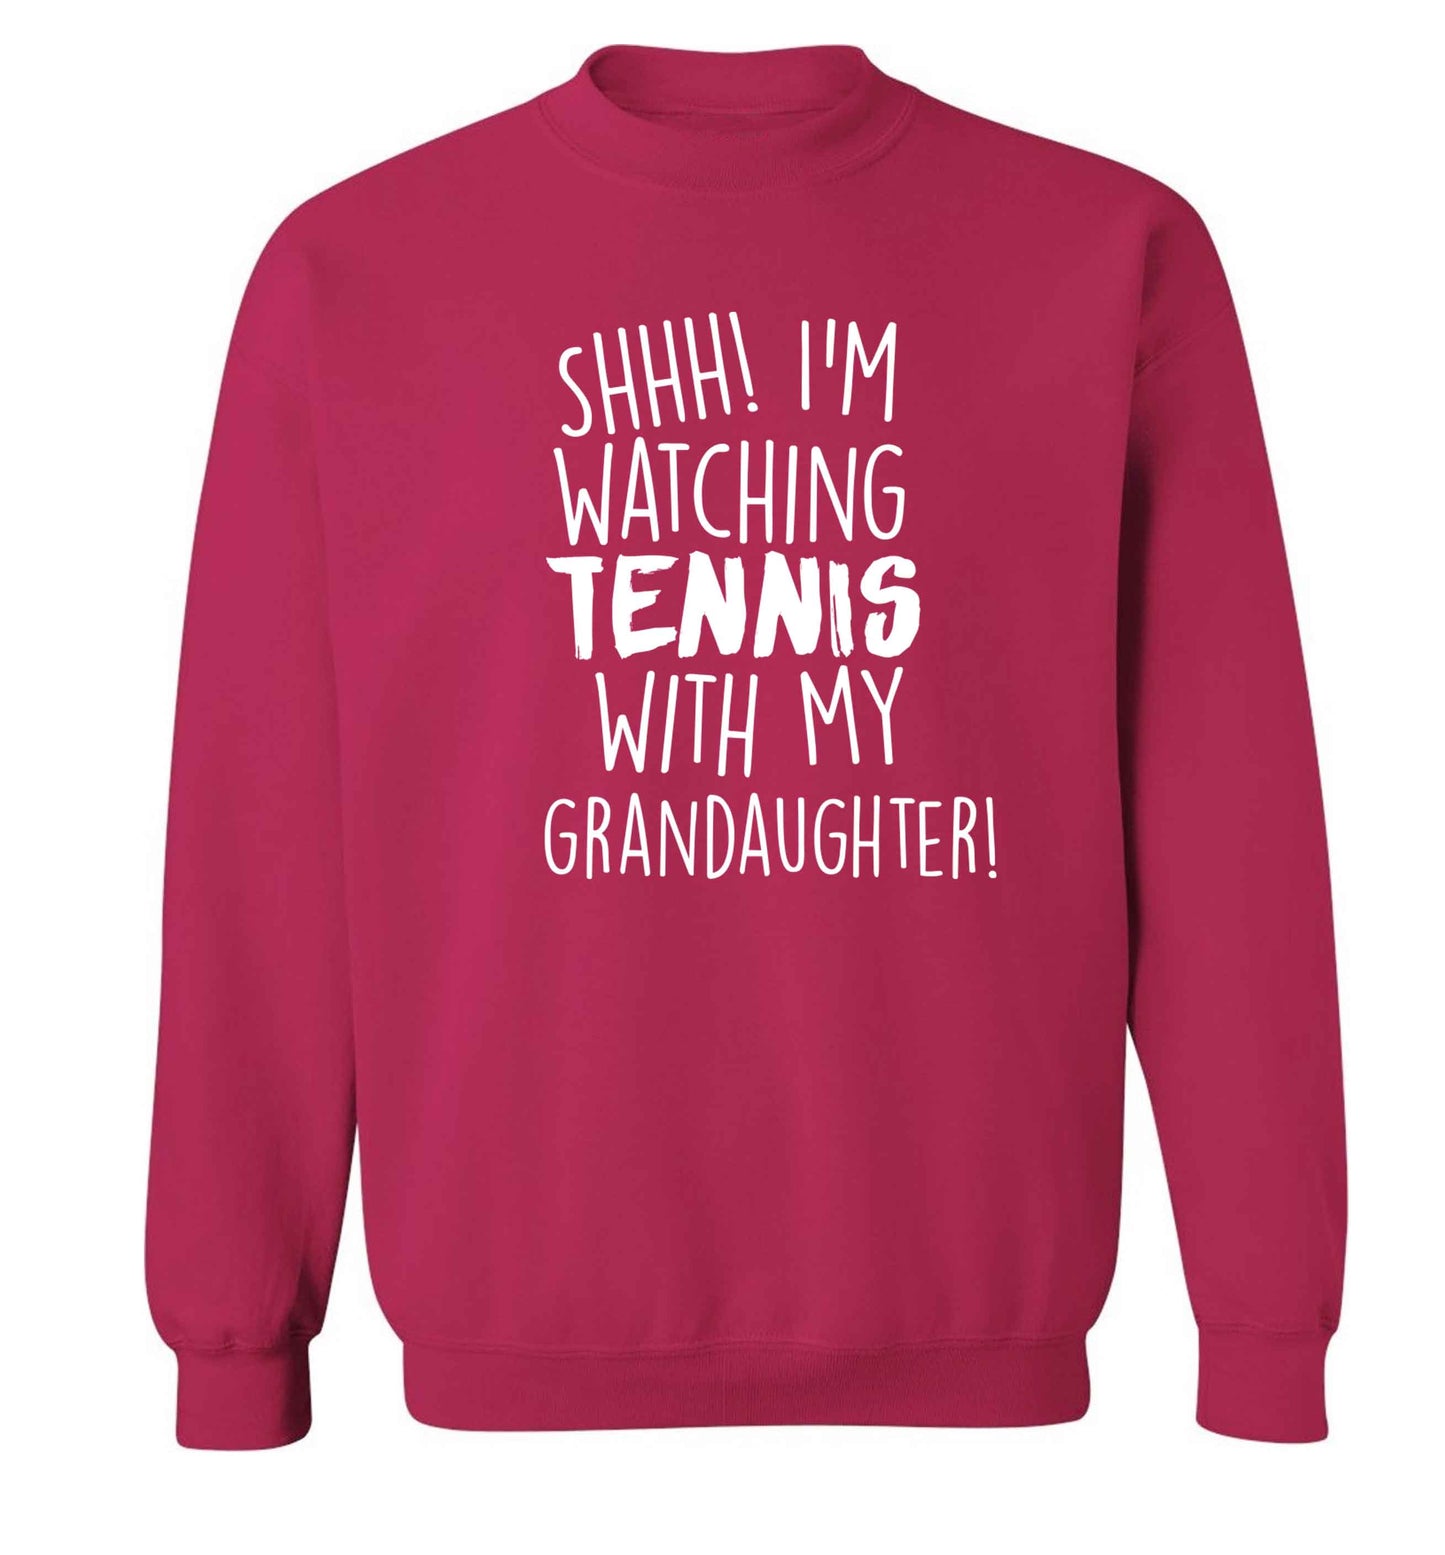 Shh! I'm watching tennis with my granddaughter! Adult's unisex pink Sweater 2XL